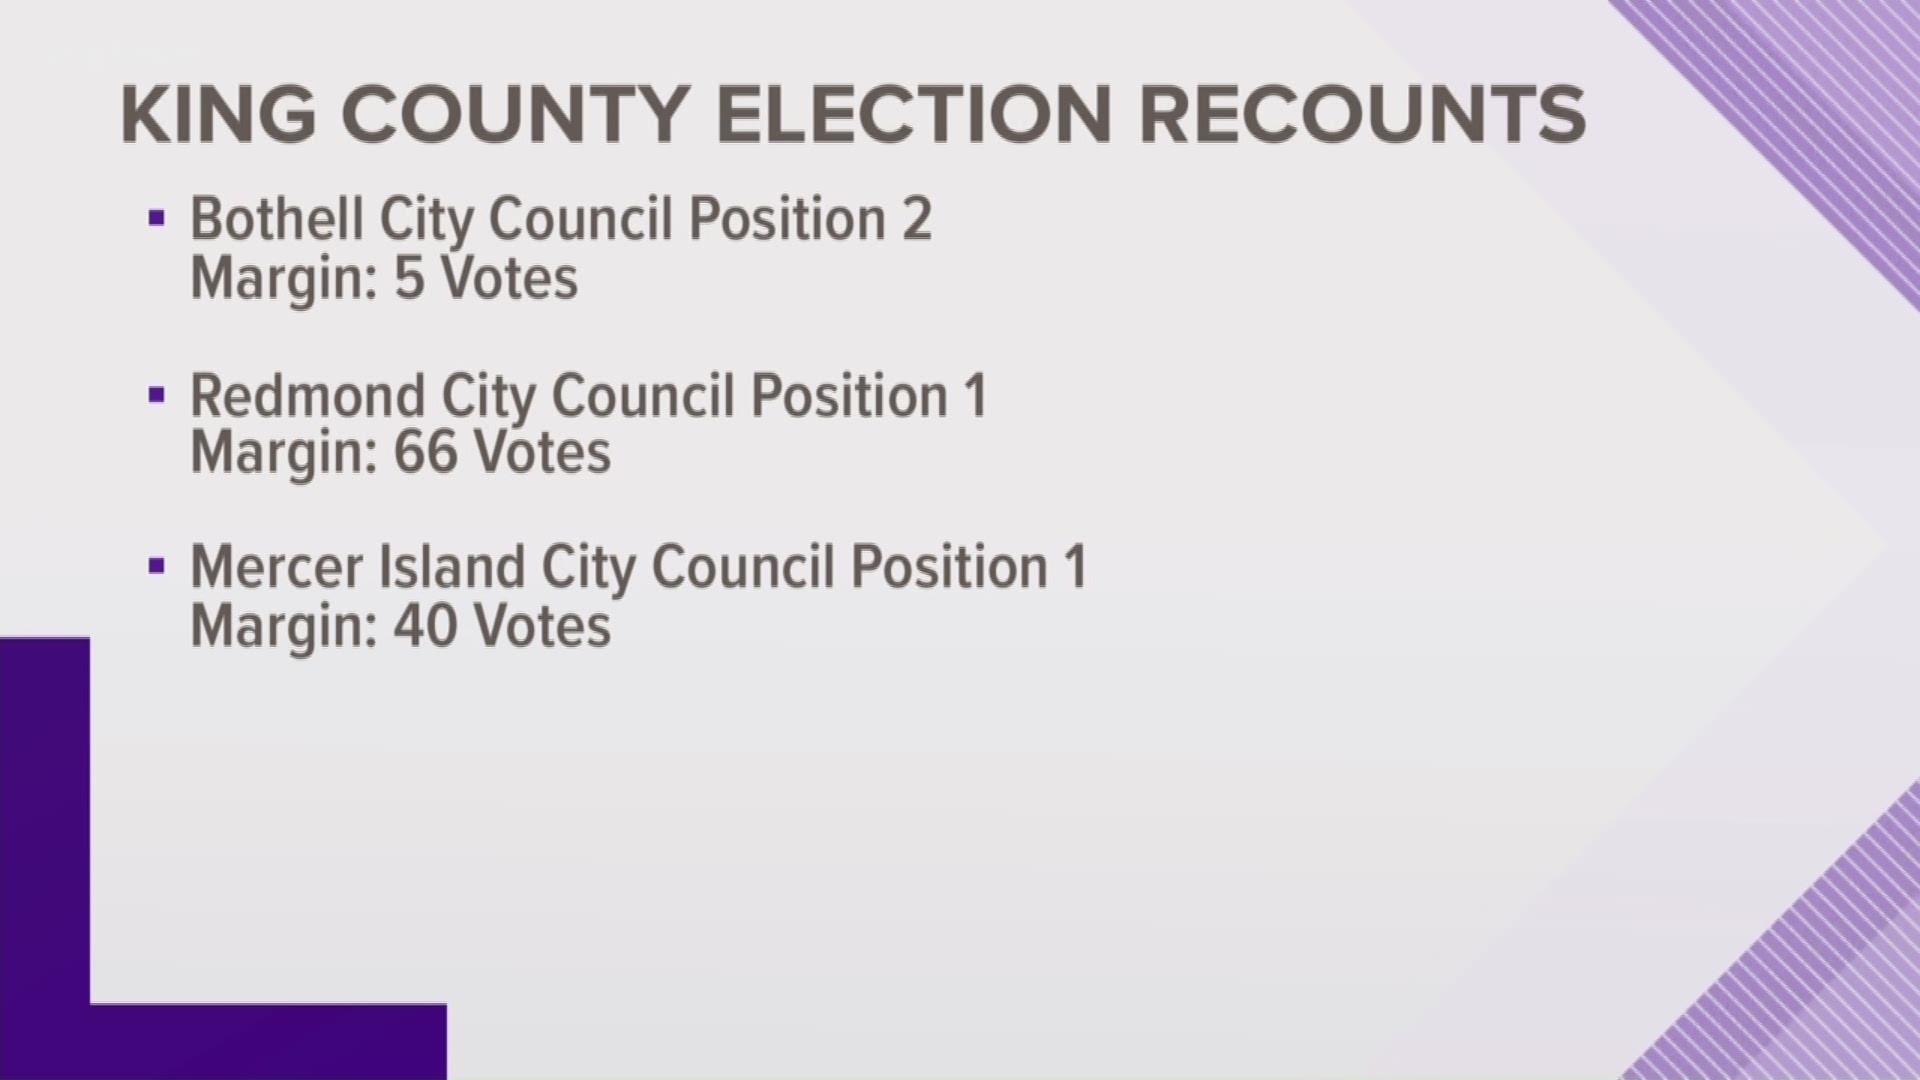 Races conducting recounts are Bothell City Council Position two, Redmond City Council Position two, and Mercer Island City Council Position one.